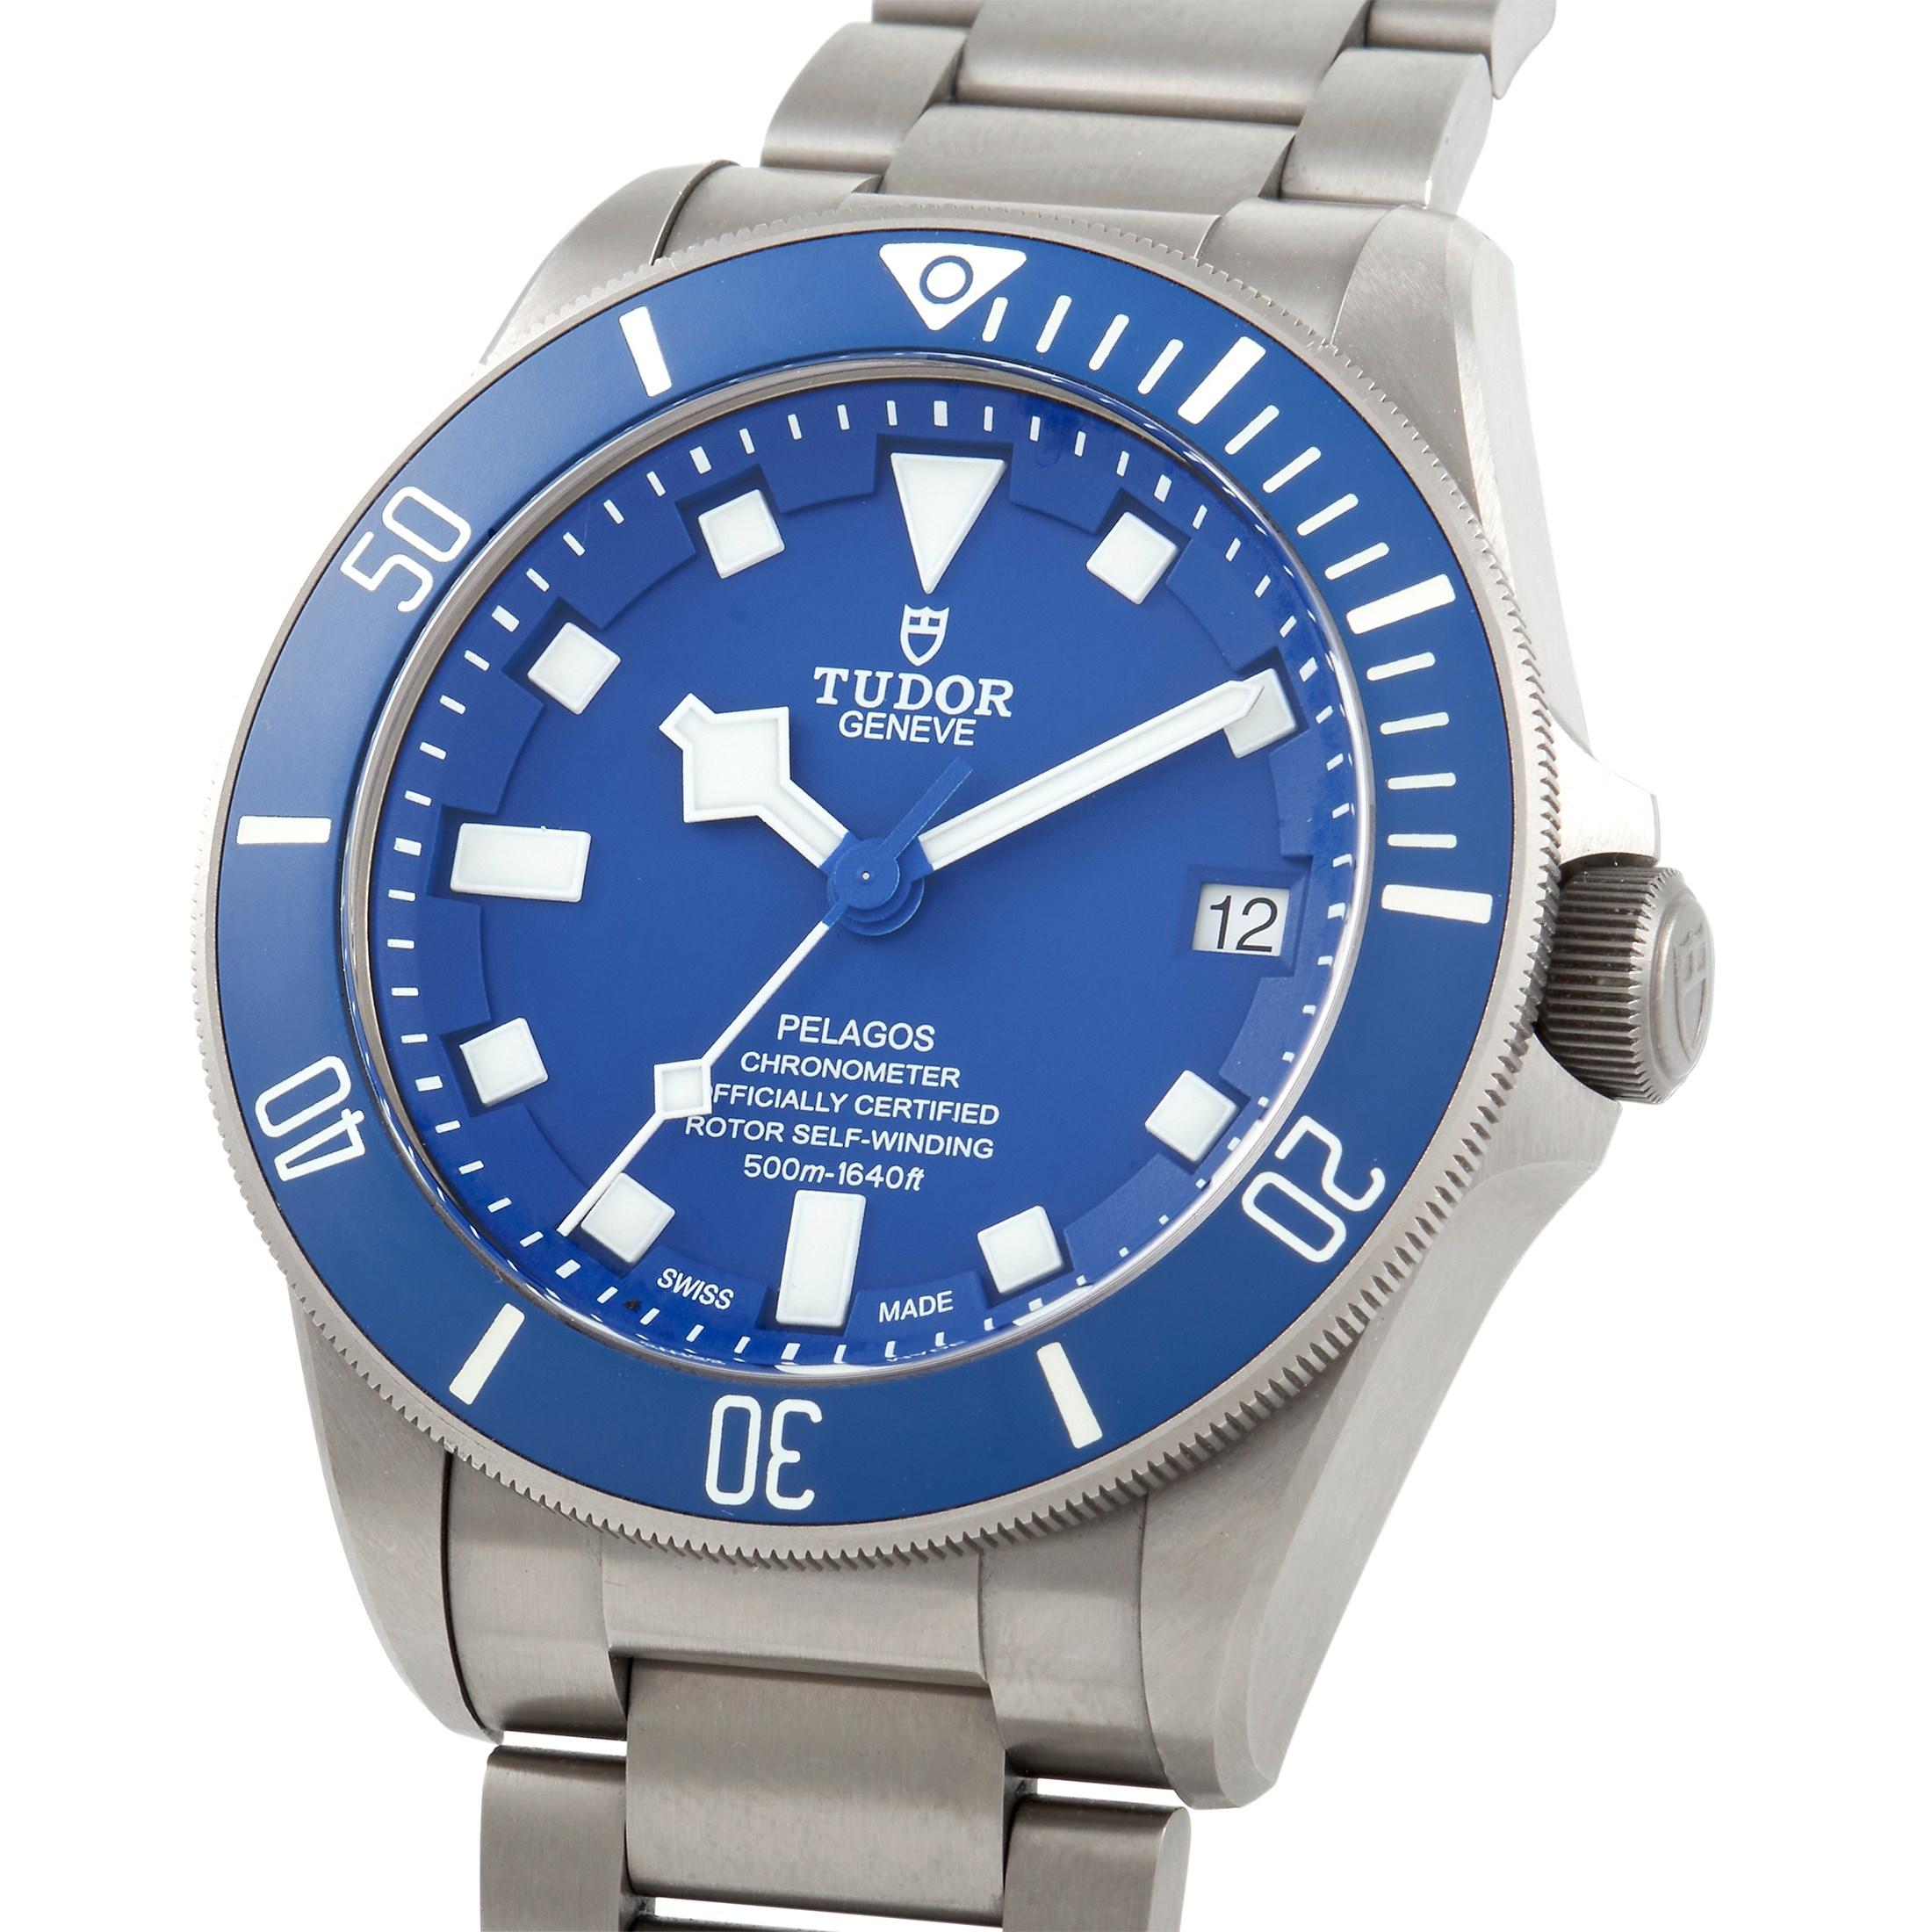 This is the Tudor Pelagos timepiece, reference number M25600TB-0001.

The watch is presented with a titanium case fitted with a unidirectional rotating titanium bezel that features matt blue ceramic disc. The case measures 42 mm in diameter and is